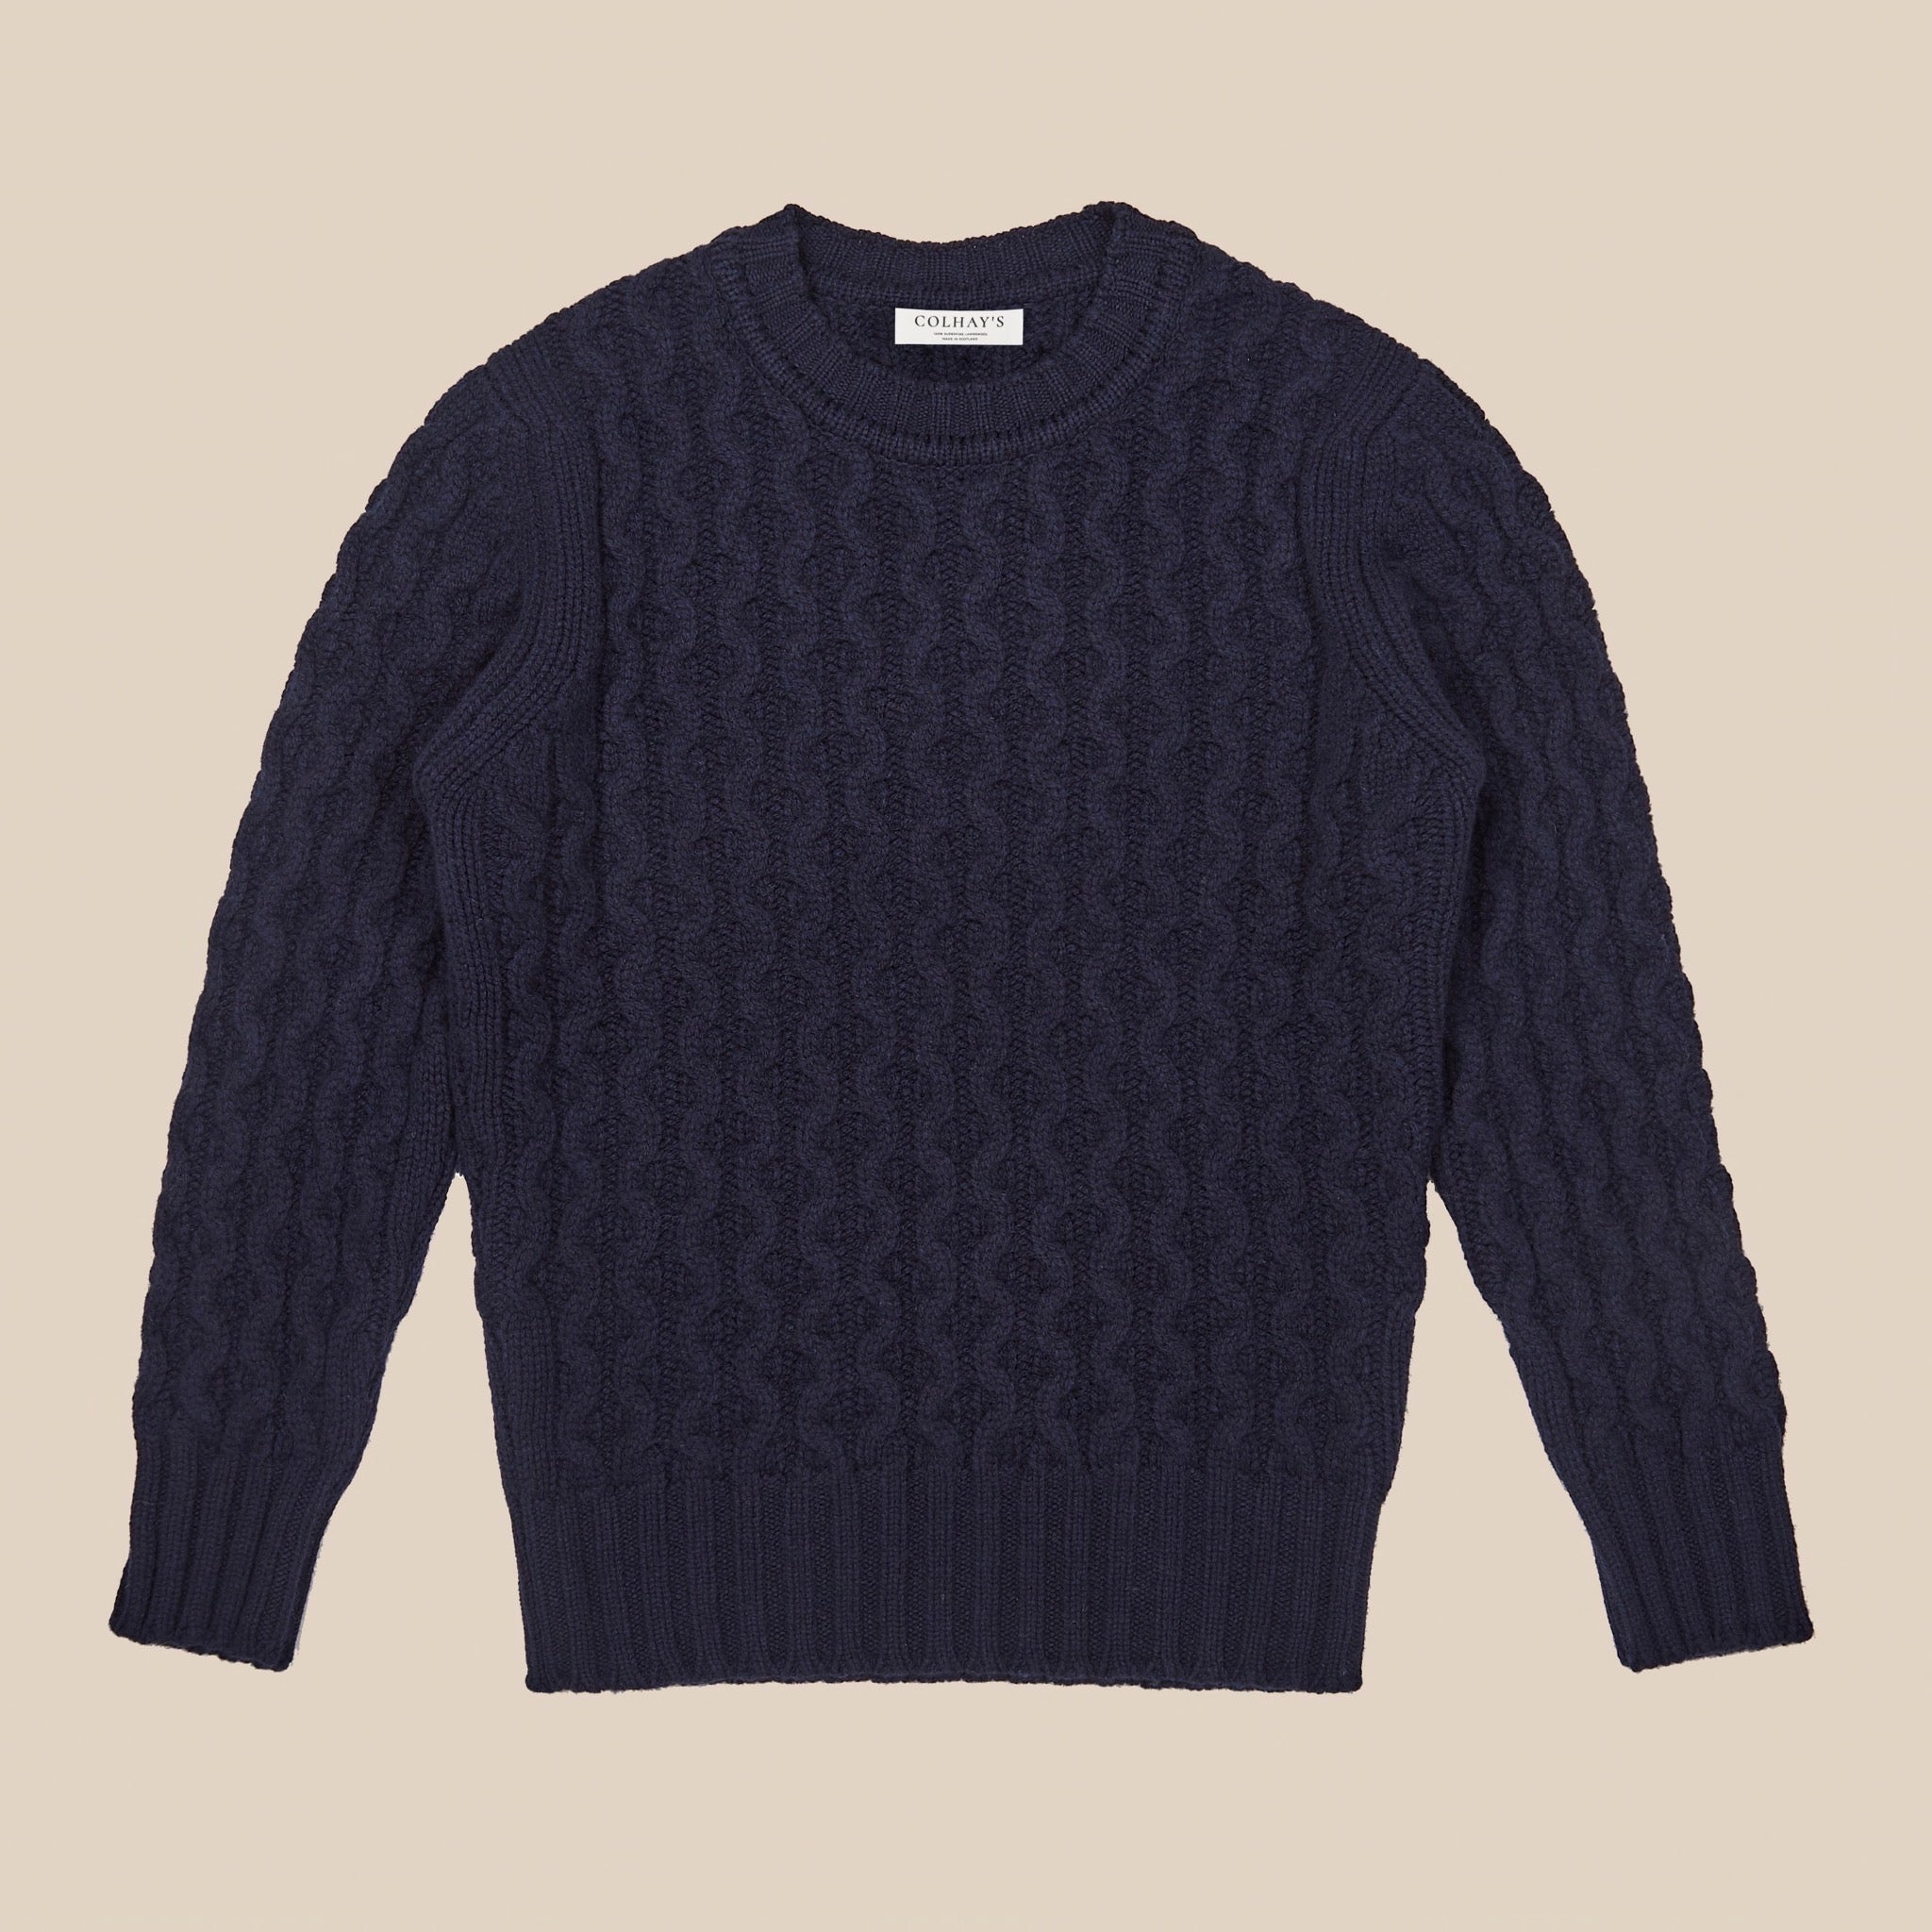 Lambswool cable knit crew neck in navy